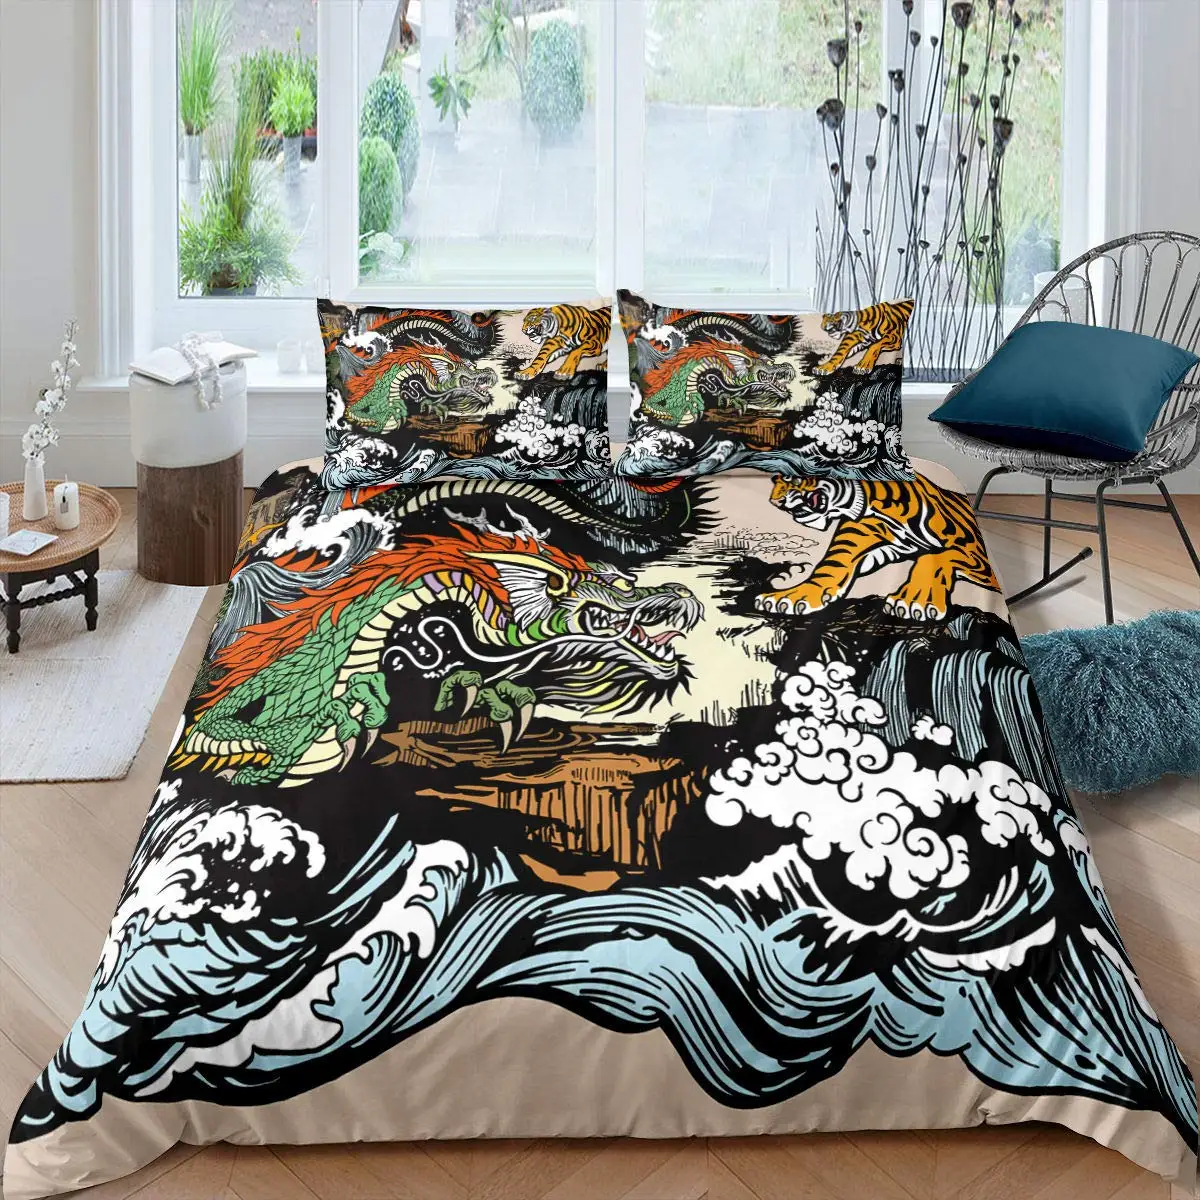 

Cover King Queen Japanese Exotic Bedding Set Ancient Mythical Animal Comforter Cover 2/3pcs Polyester Quilt Cover